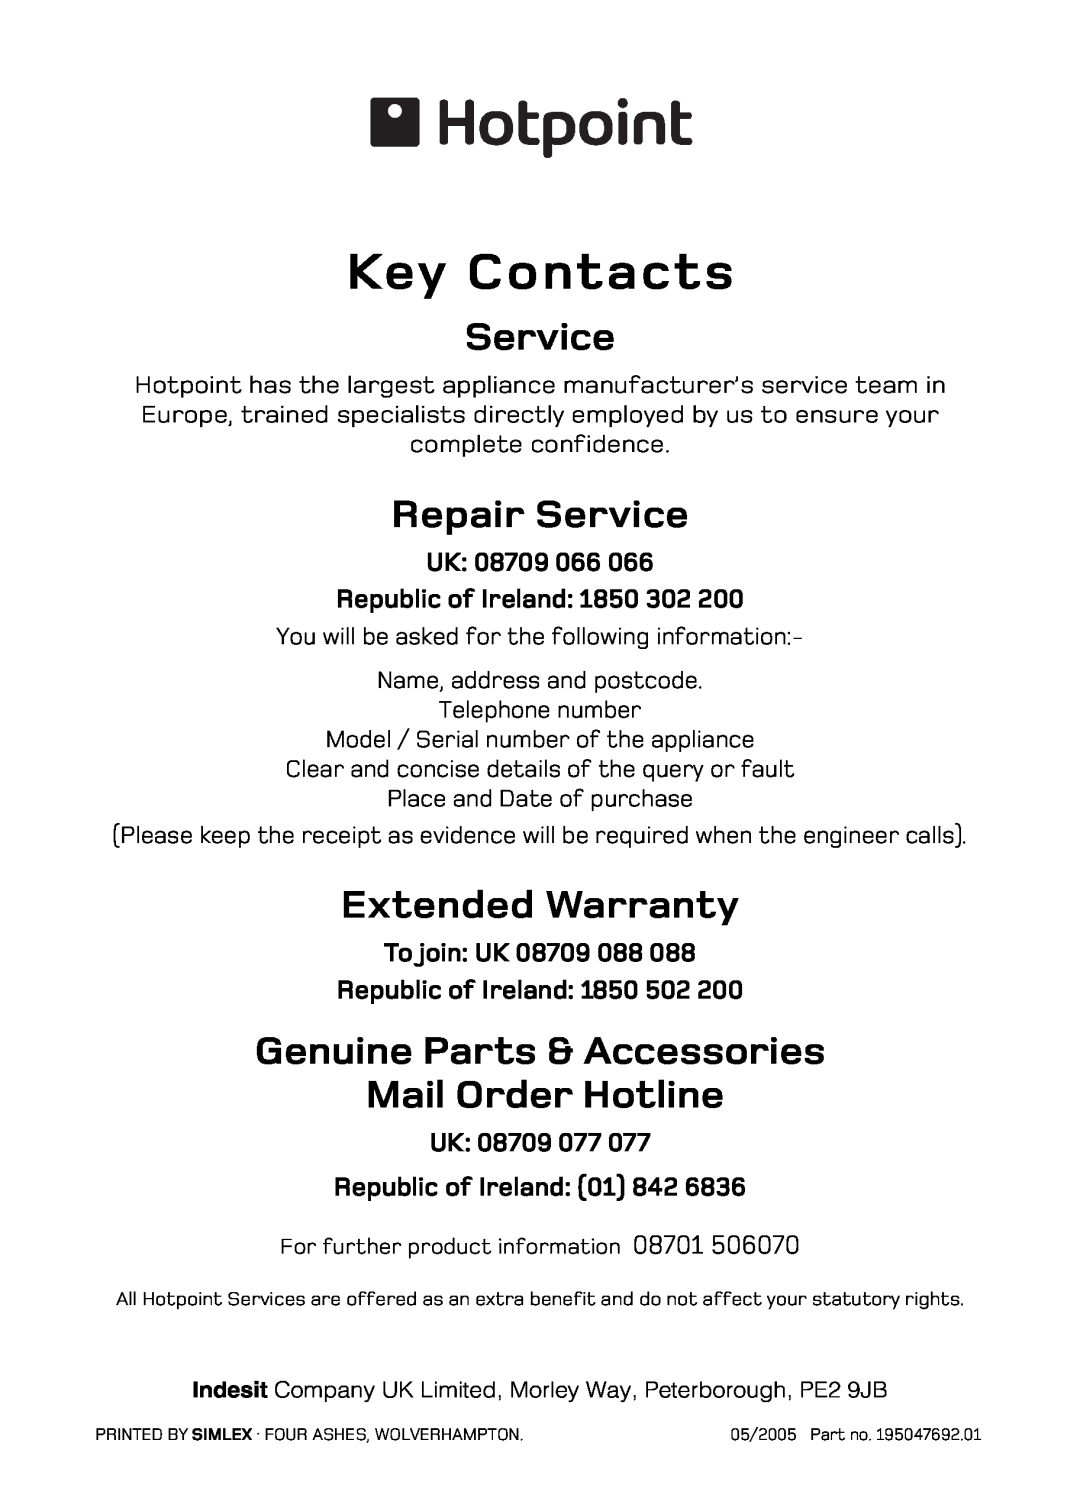 Hotpoint UQ47, UE47 Repair Service, Extended Warranty, Genuine Parts & Accessories Mail Order Hotline, Key Contacts 